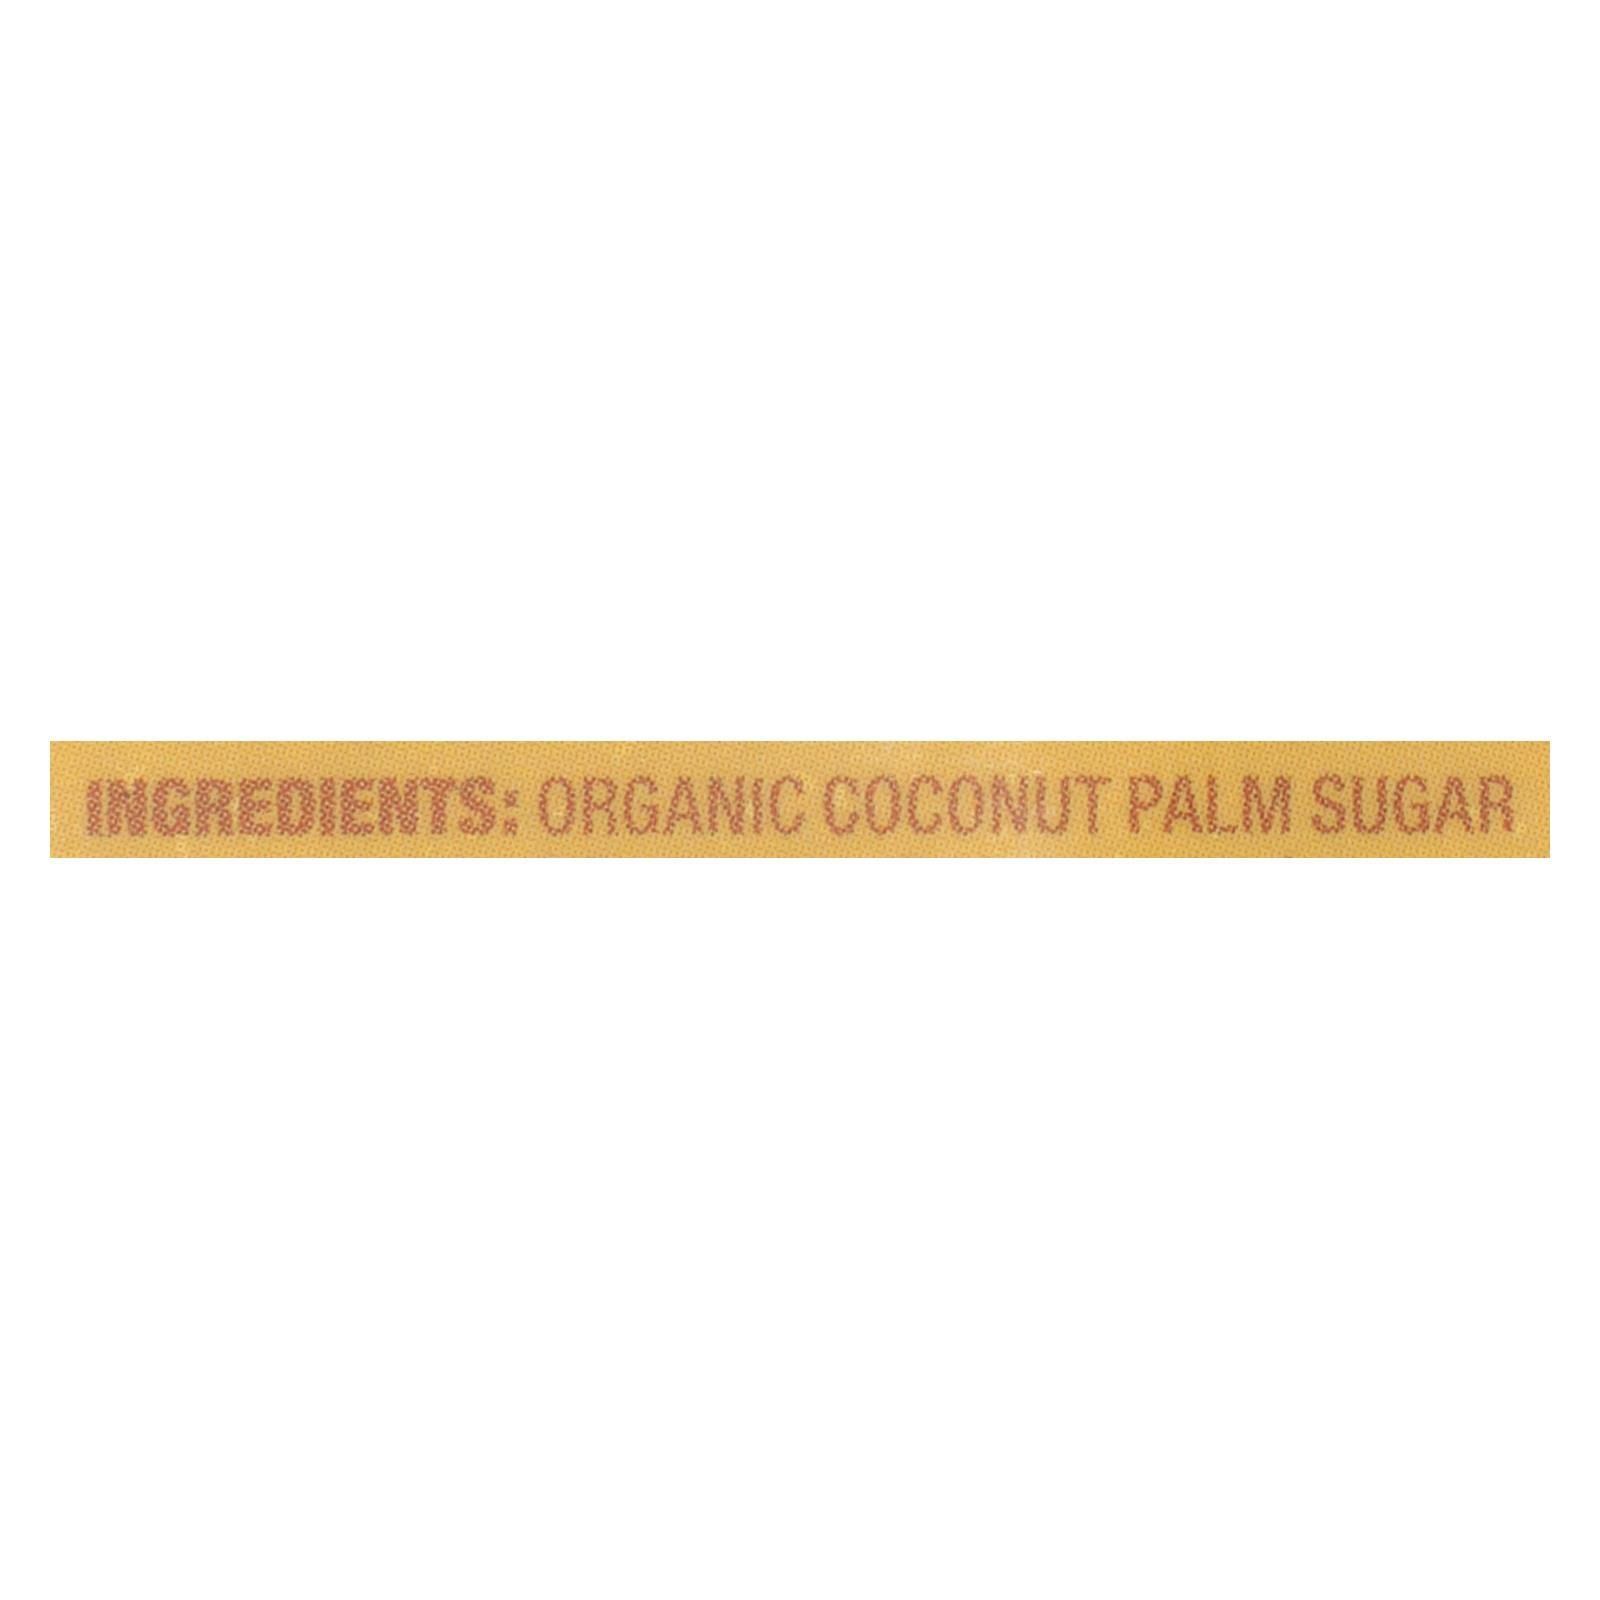 Buy Wholesome Sweeteners Sugar - Organic - Coconut Palm - 16 Oz - Case Of 6  at OnlyNaturals.us